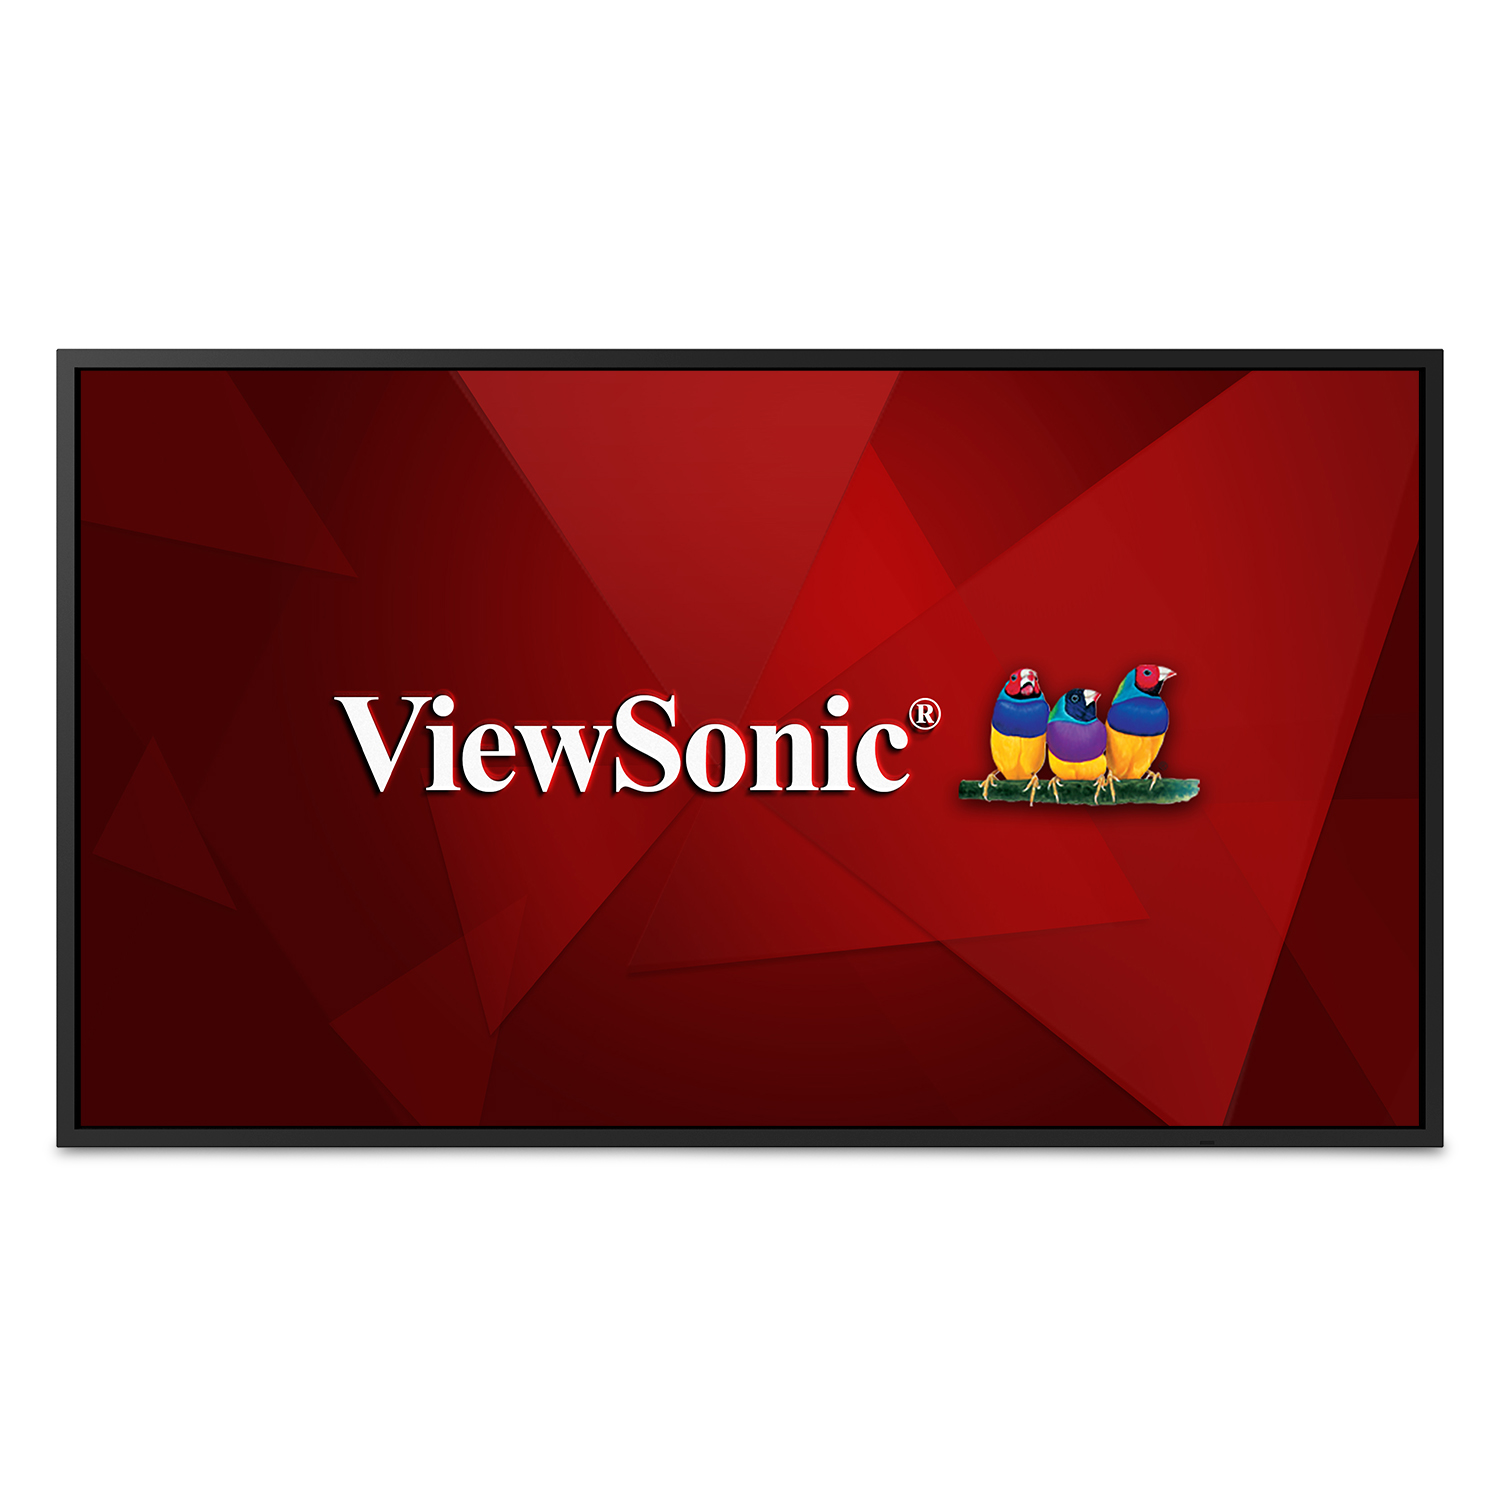 ViewSonic CDE5520 55 Inch 4K UHD Wireless Presentation Display with Twin Dual-Core Processors, 24/7 Operation Rating 16GB Storage Screen Sharing RJ45 or Wi-Fi DVI HDMI - image 1 of 9